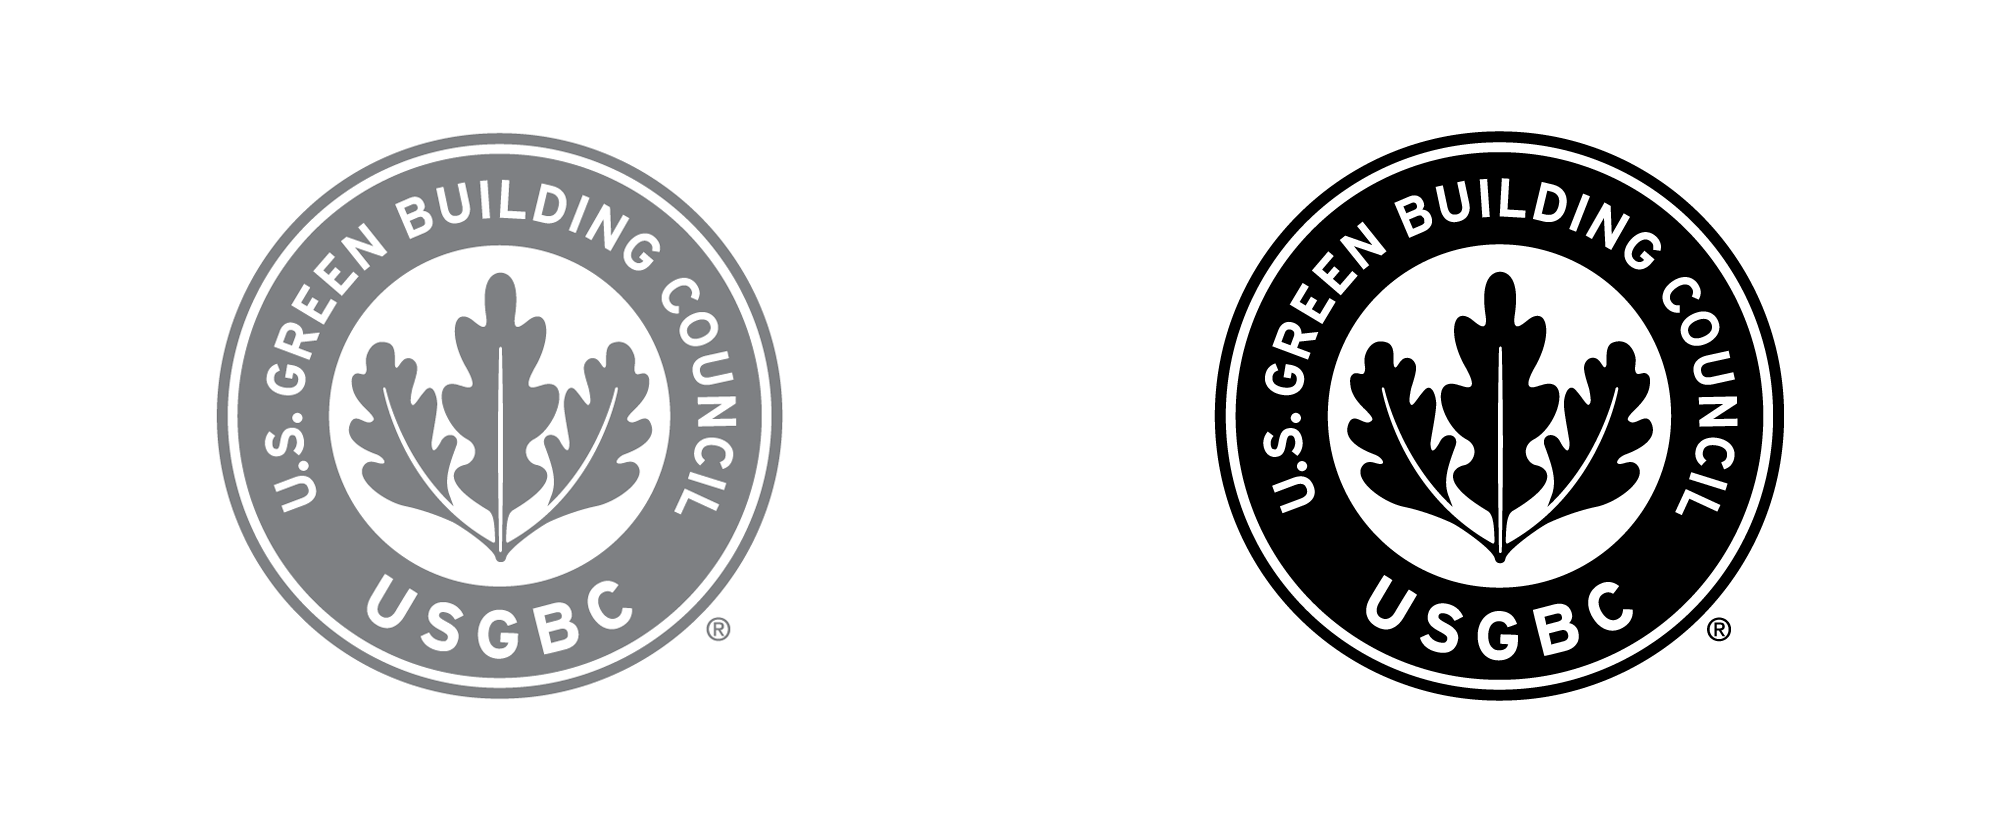 New Logo and Identity for U.S. Green Building Council